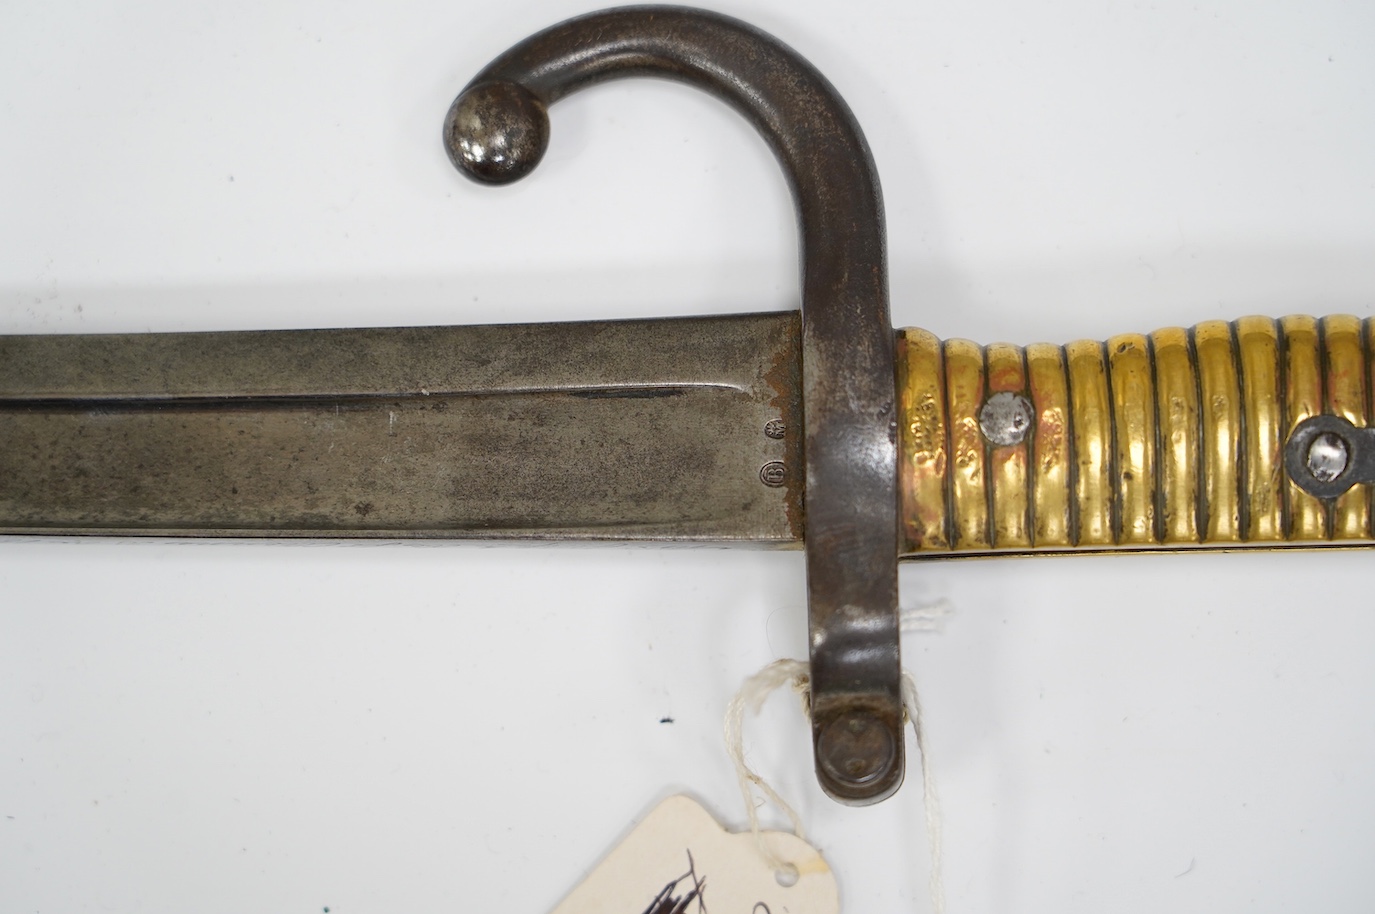 A French bayonet for a Chassepot rifle, blade dated 1869. Condition - good